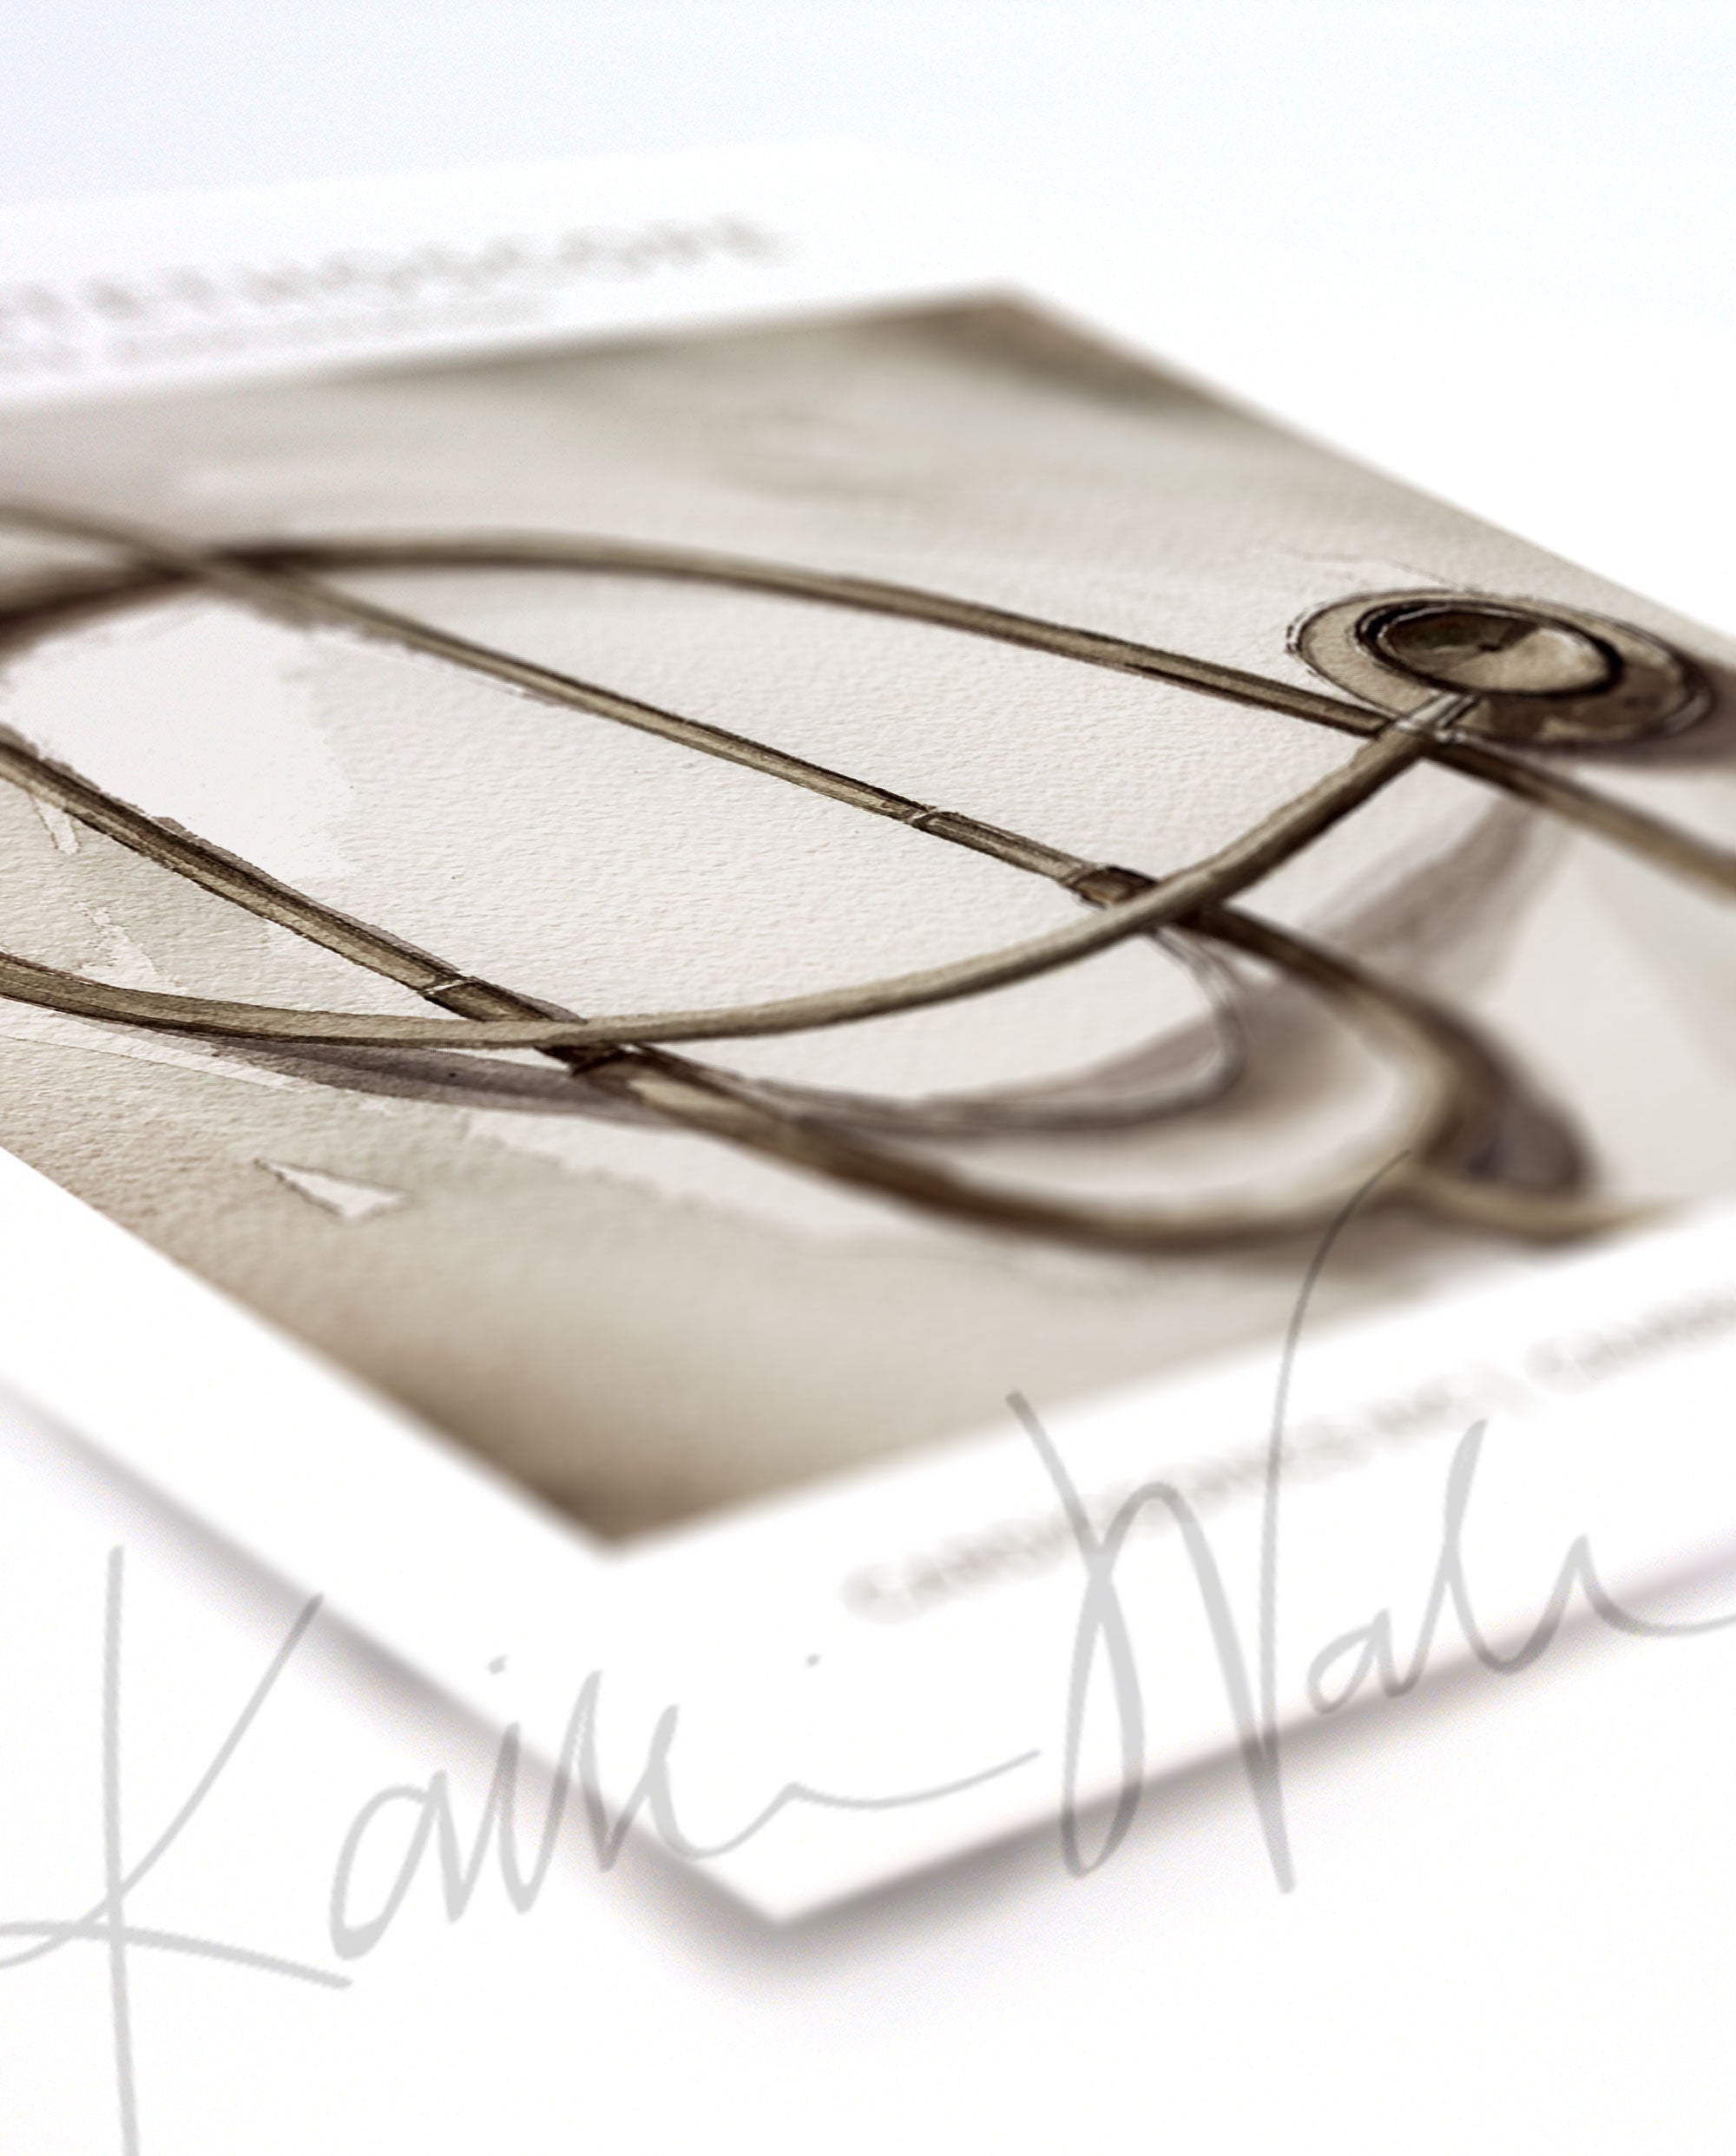 Angled view of a watercolor painting of a Littmann stethoscope in an antique style.